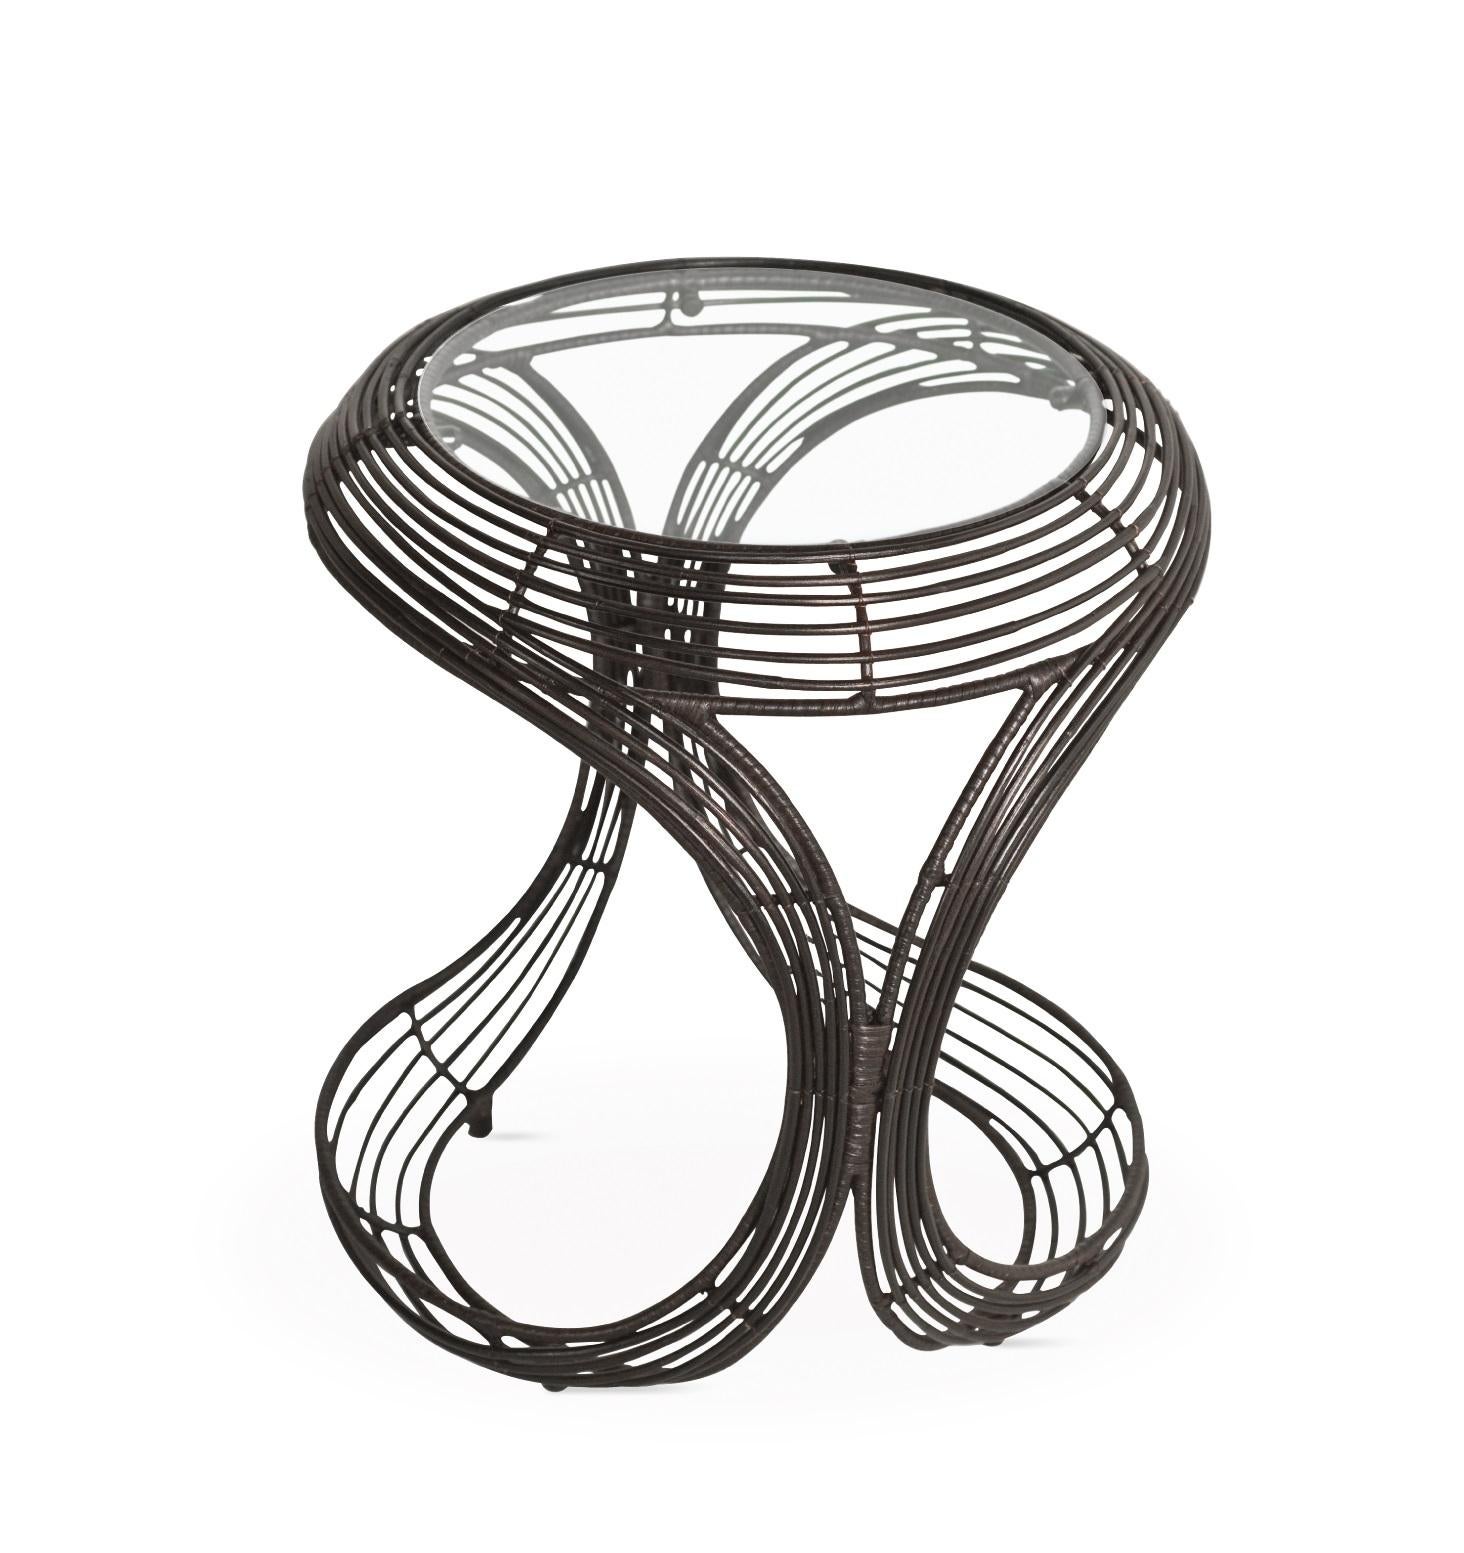 Outdoor manolo end table by Kenneth Cobonpue
Materials: Polyethelene, nylon, steel, glass.
Also available in other colors and for indoors. 
Dimensions: 
Glass Diameter 31.5 cm x height 6mm
Table 45 cm x 50cm x 50cm 

Taking inspiration from